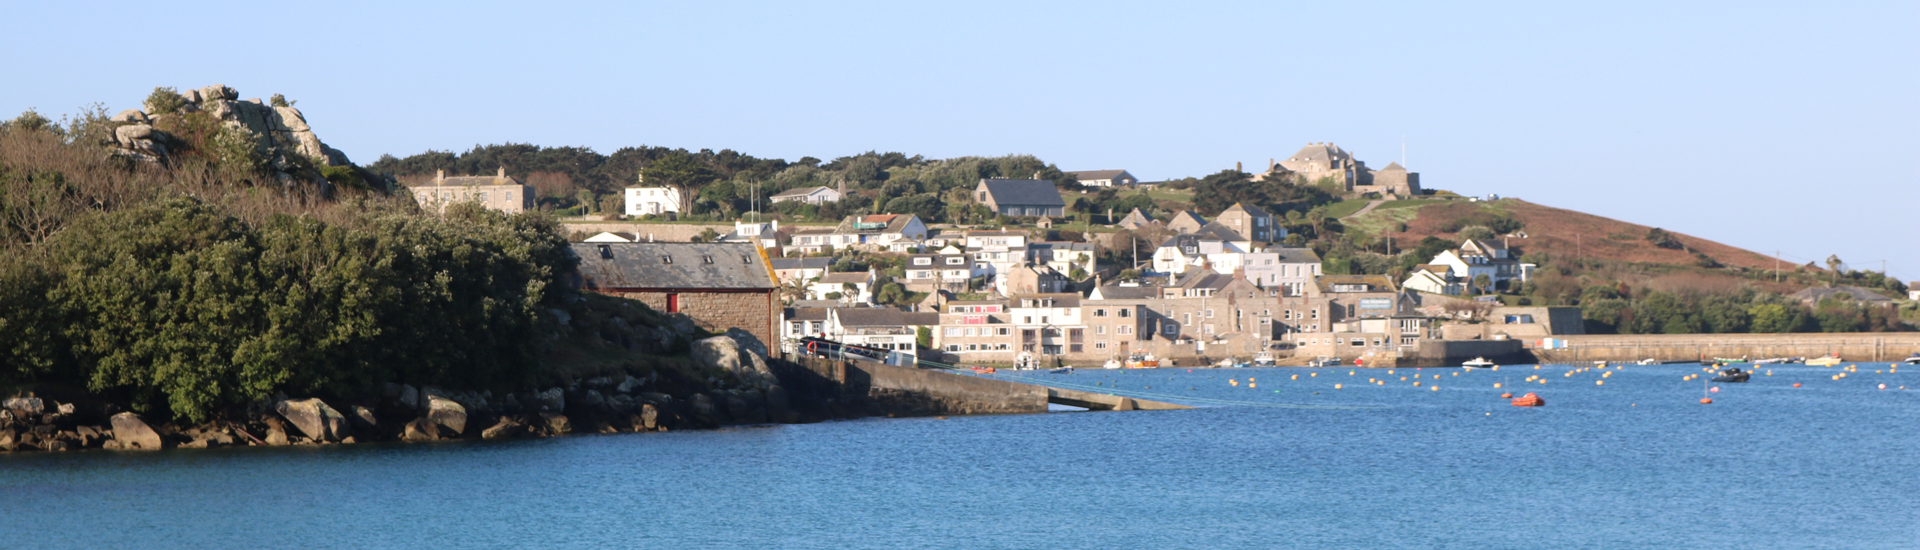 Holiday Apartment on the Isles of Scilly